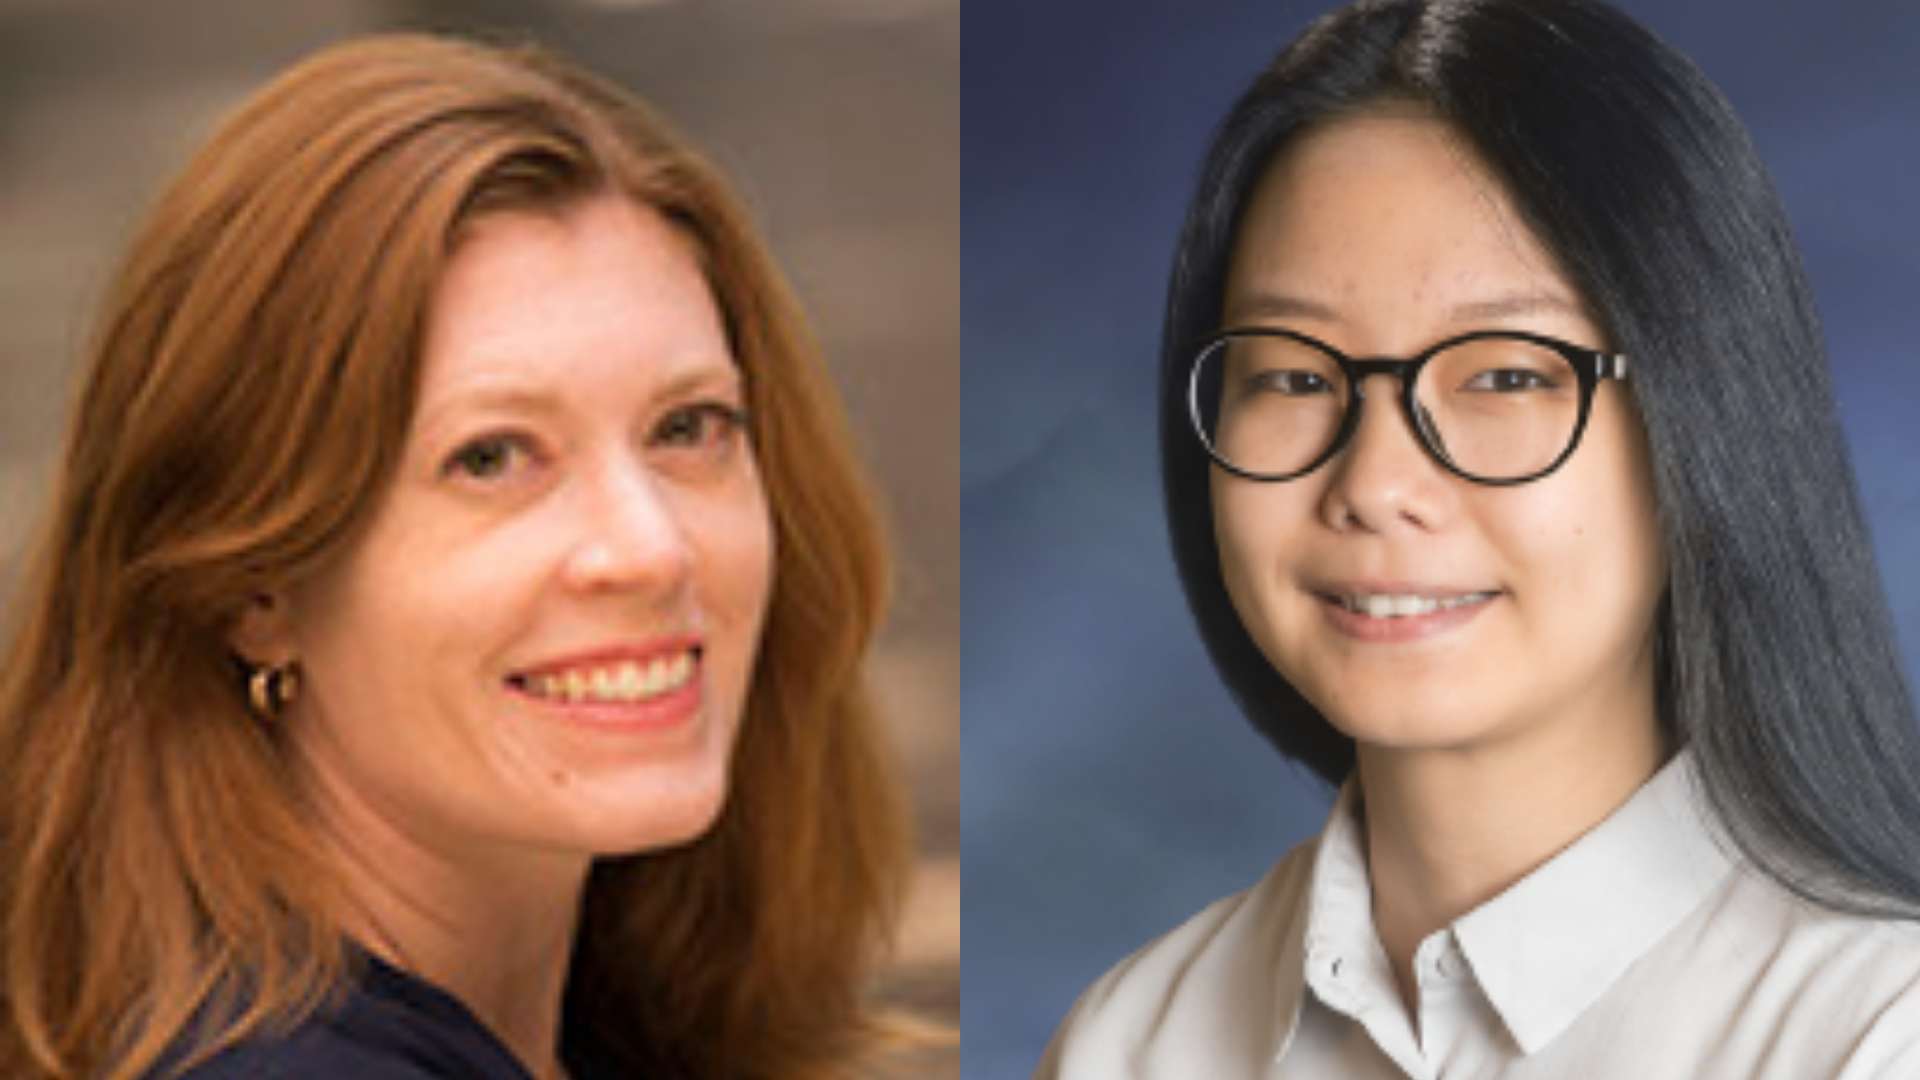 Professor Rachel Smith-Bolton (left) and postdoctoral research Yuan Tian (right).